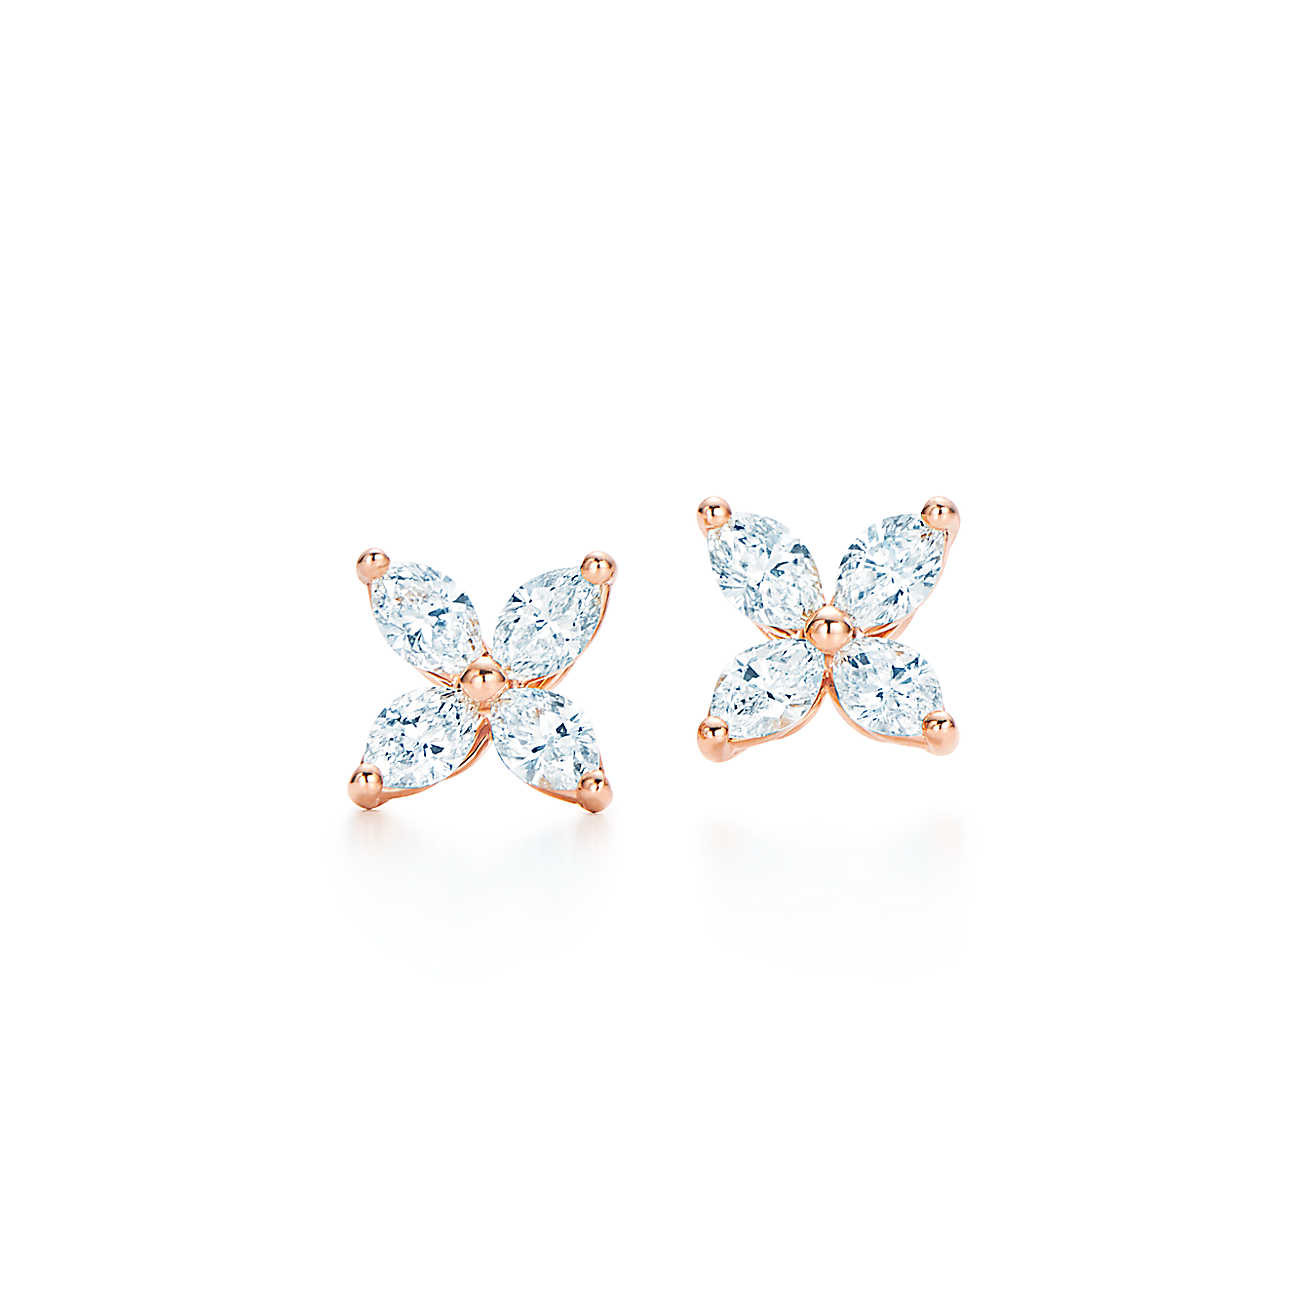 Tiffany Victoria Earrings
 Tiffany Victoria earrings in 18k rose gold with diamonds